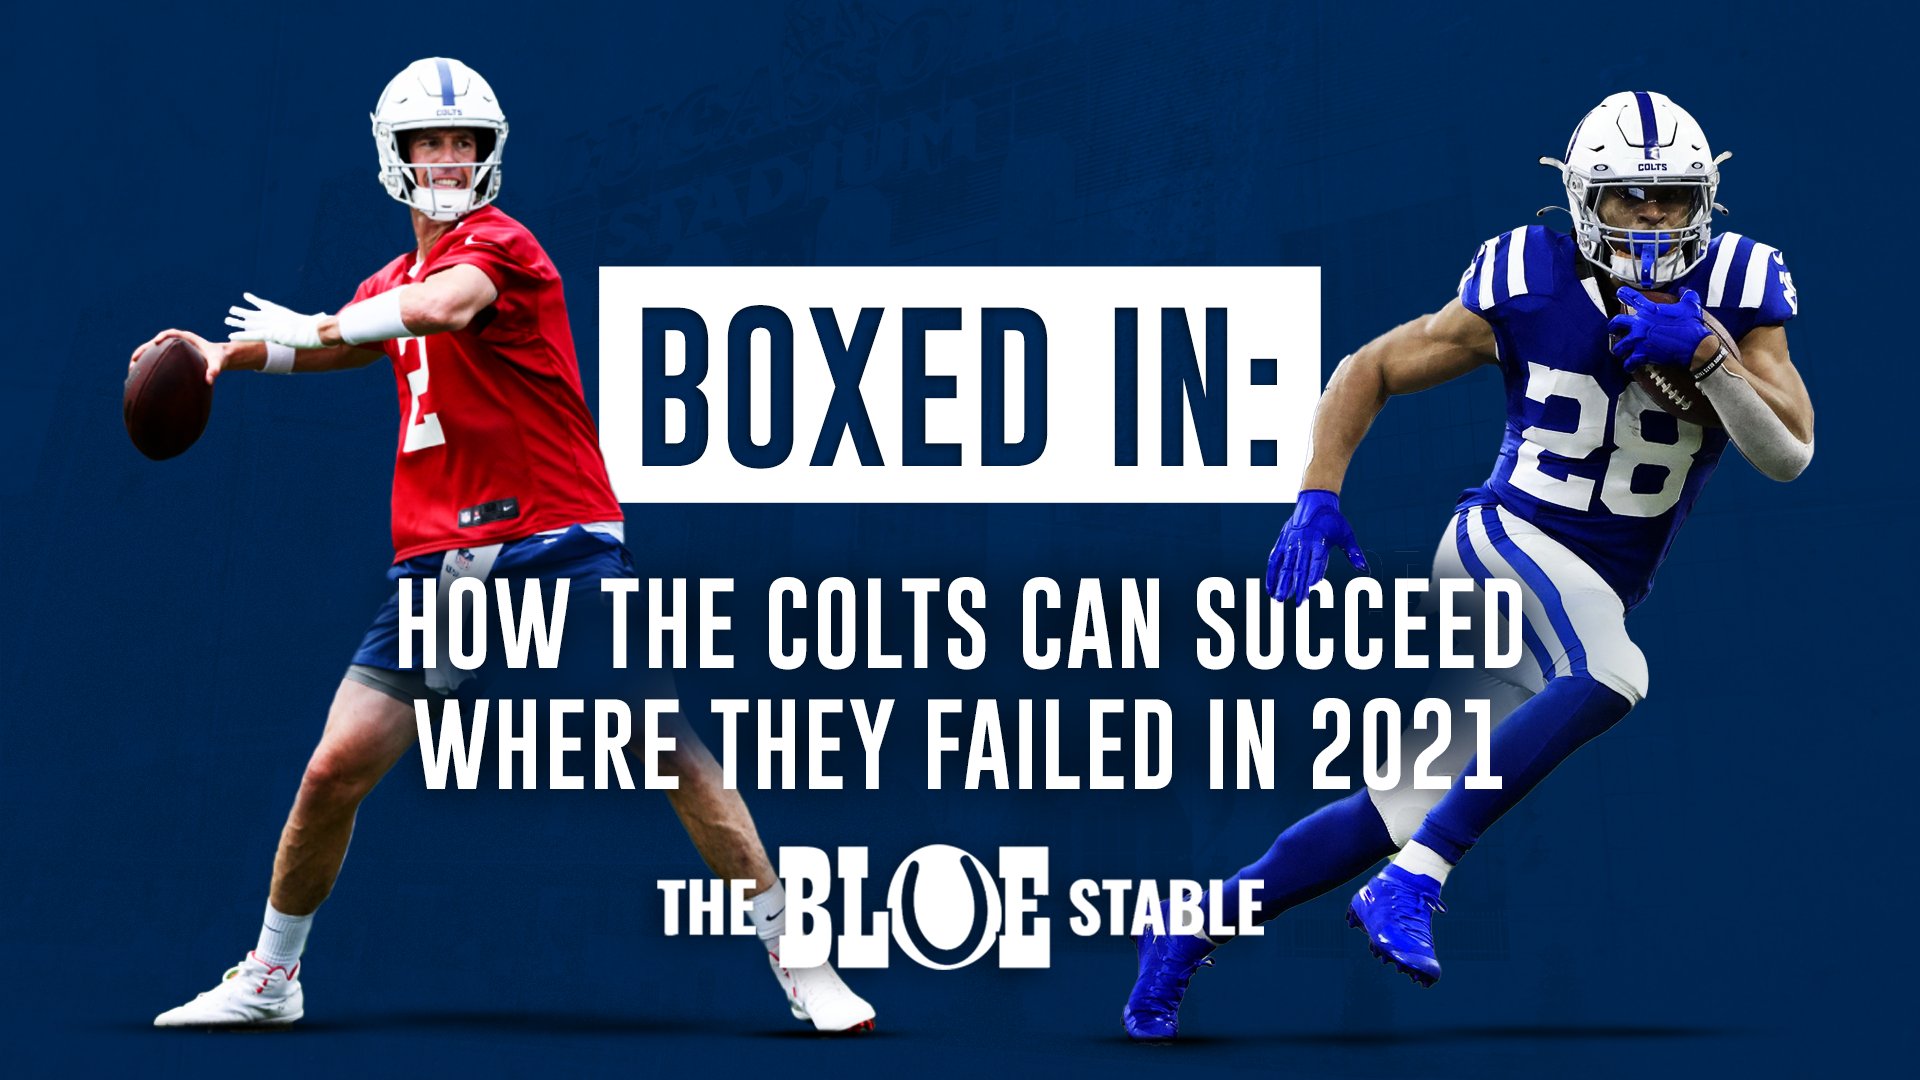 Boxed In: How the Colts can Succeed Where they Failed in 2021